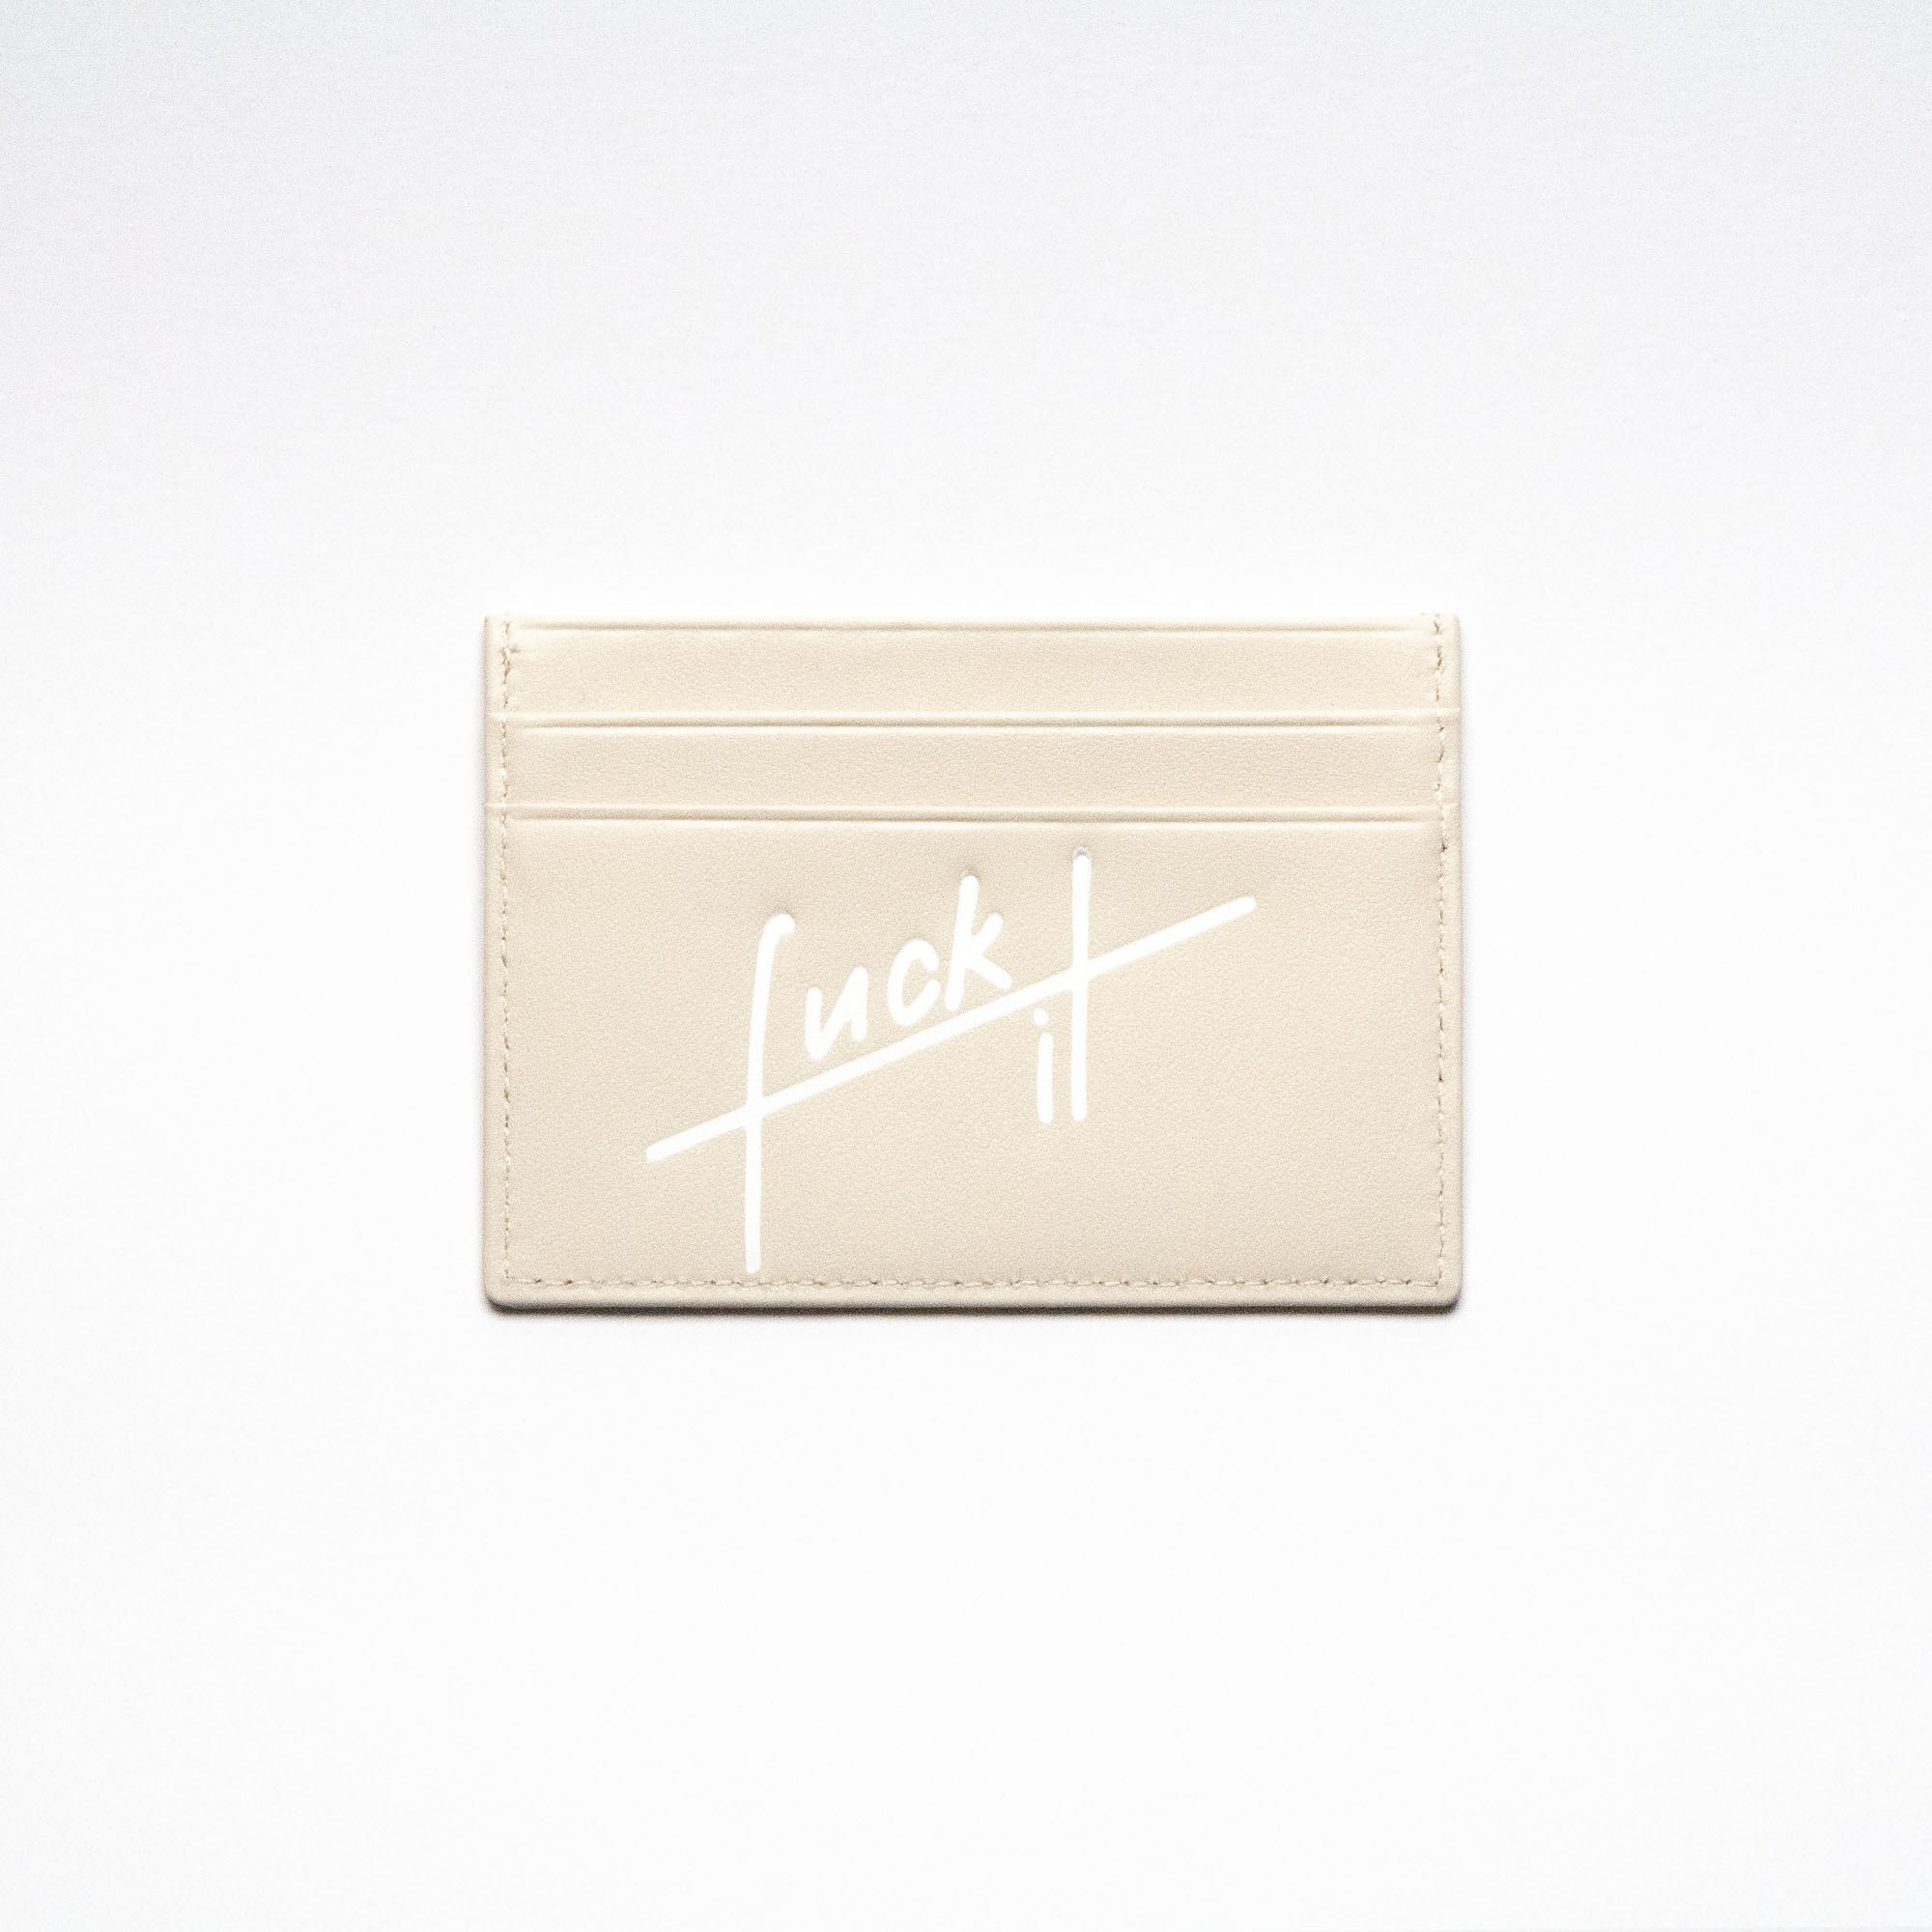 CARD HOLDER CHECK NUDE 'fuck it'